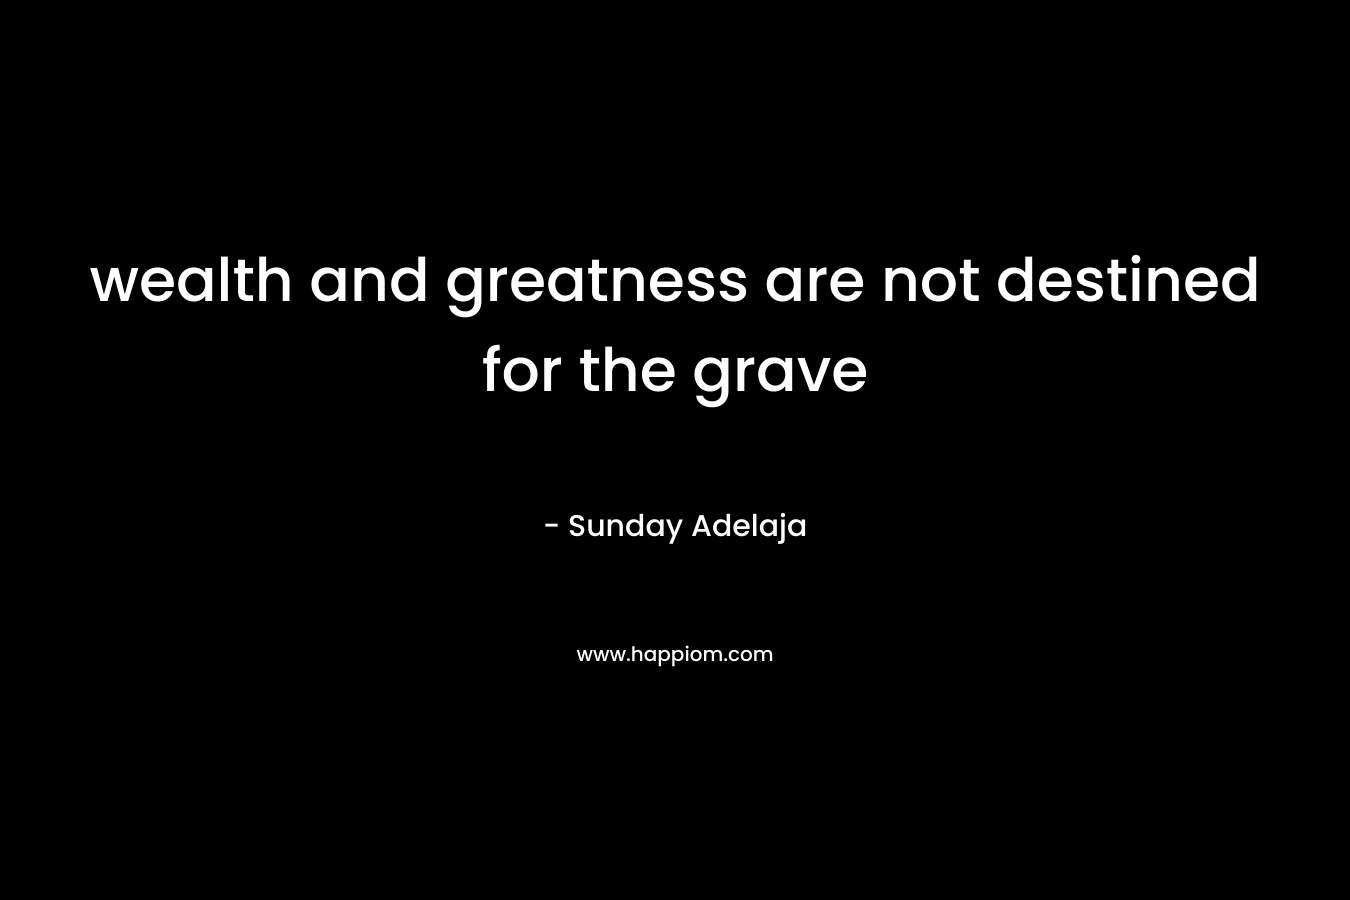 wealth and greatness are not destined for the grave